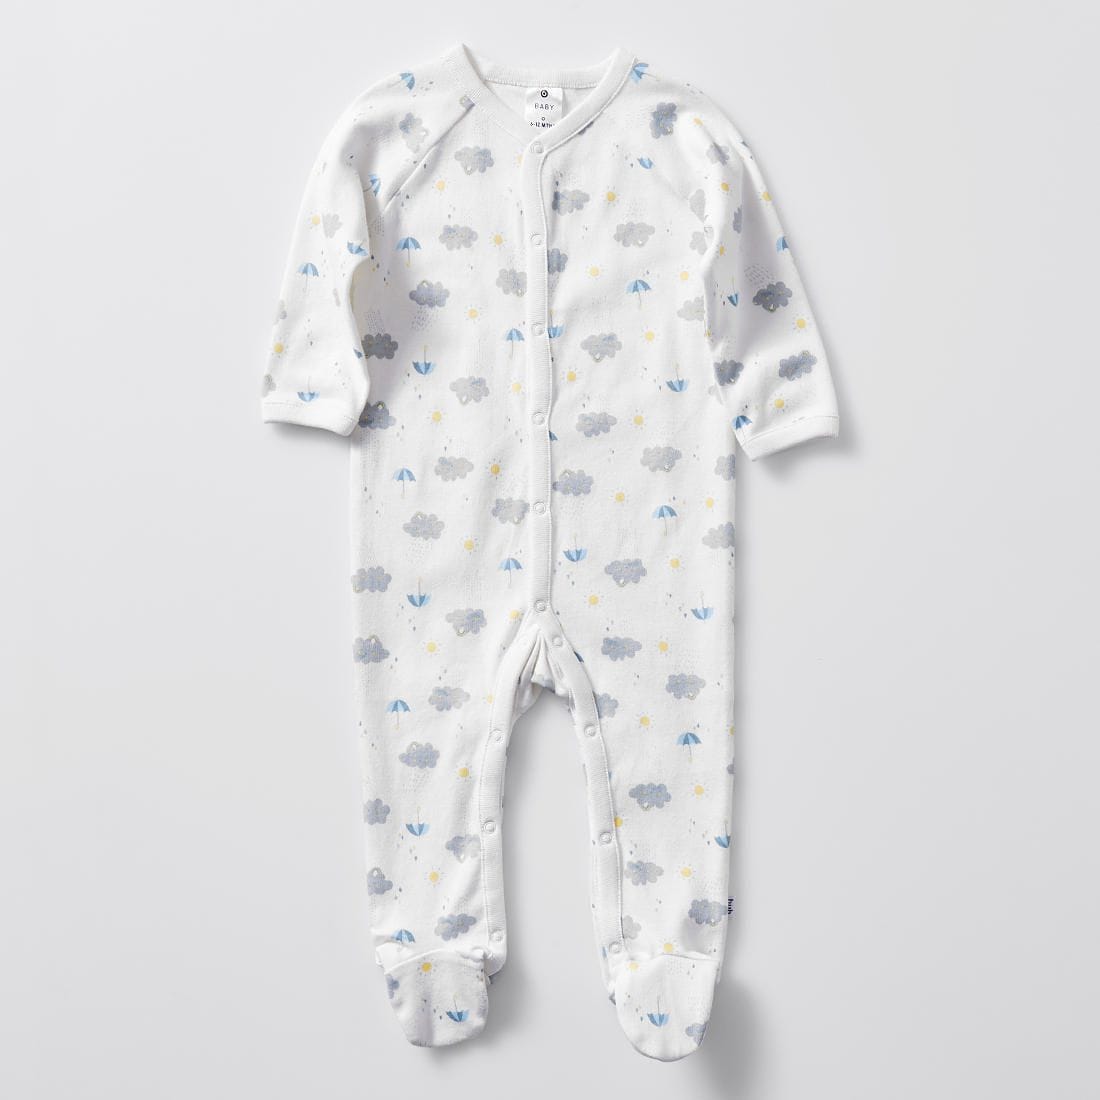 Baby Sloth Print Coverall - White Clouds (Newborn Size)